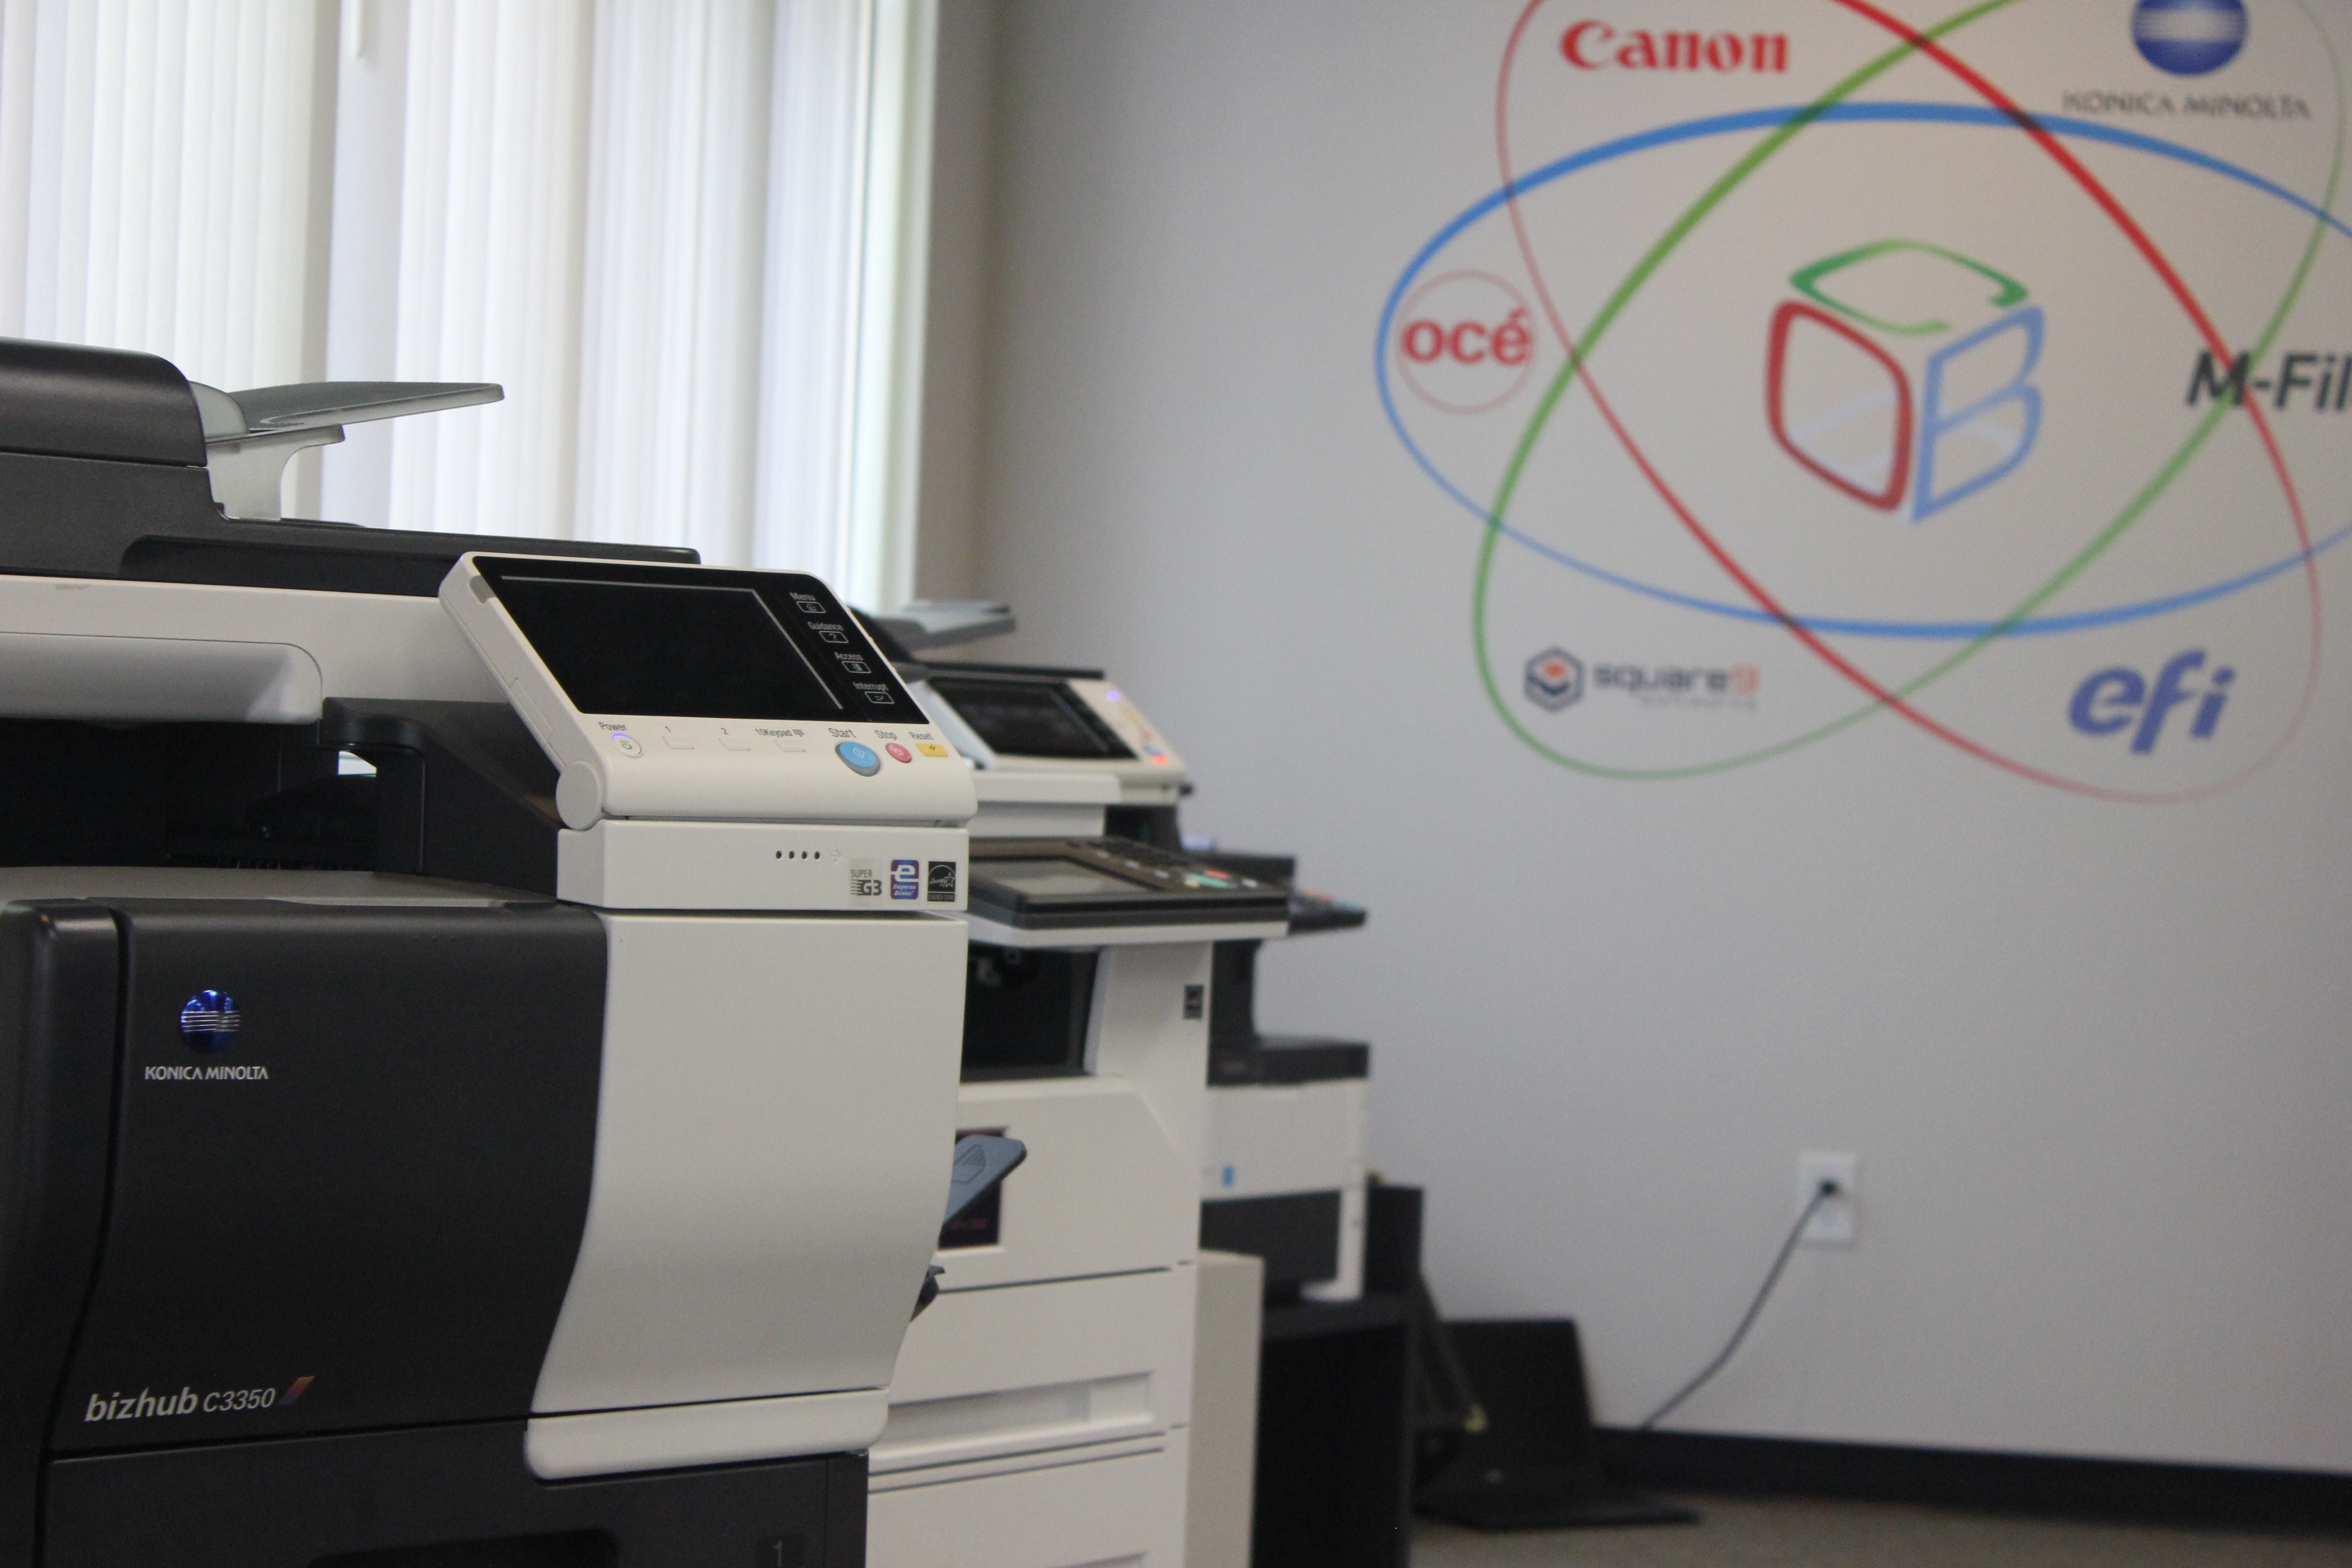 Price? Size? What you need to know when researching office printers